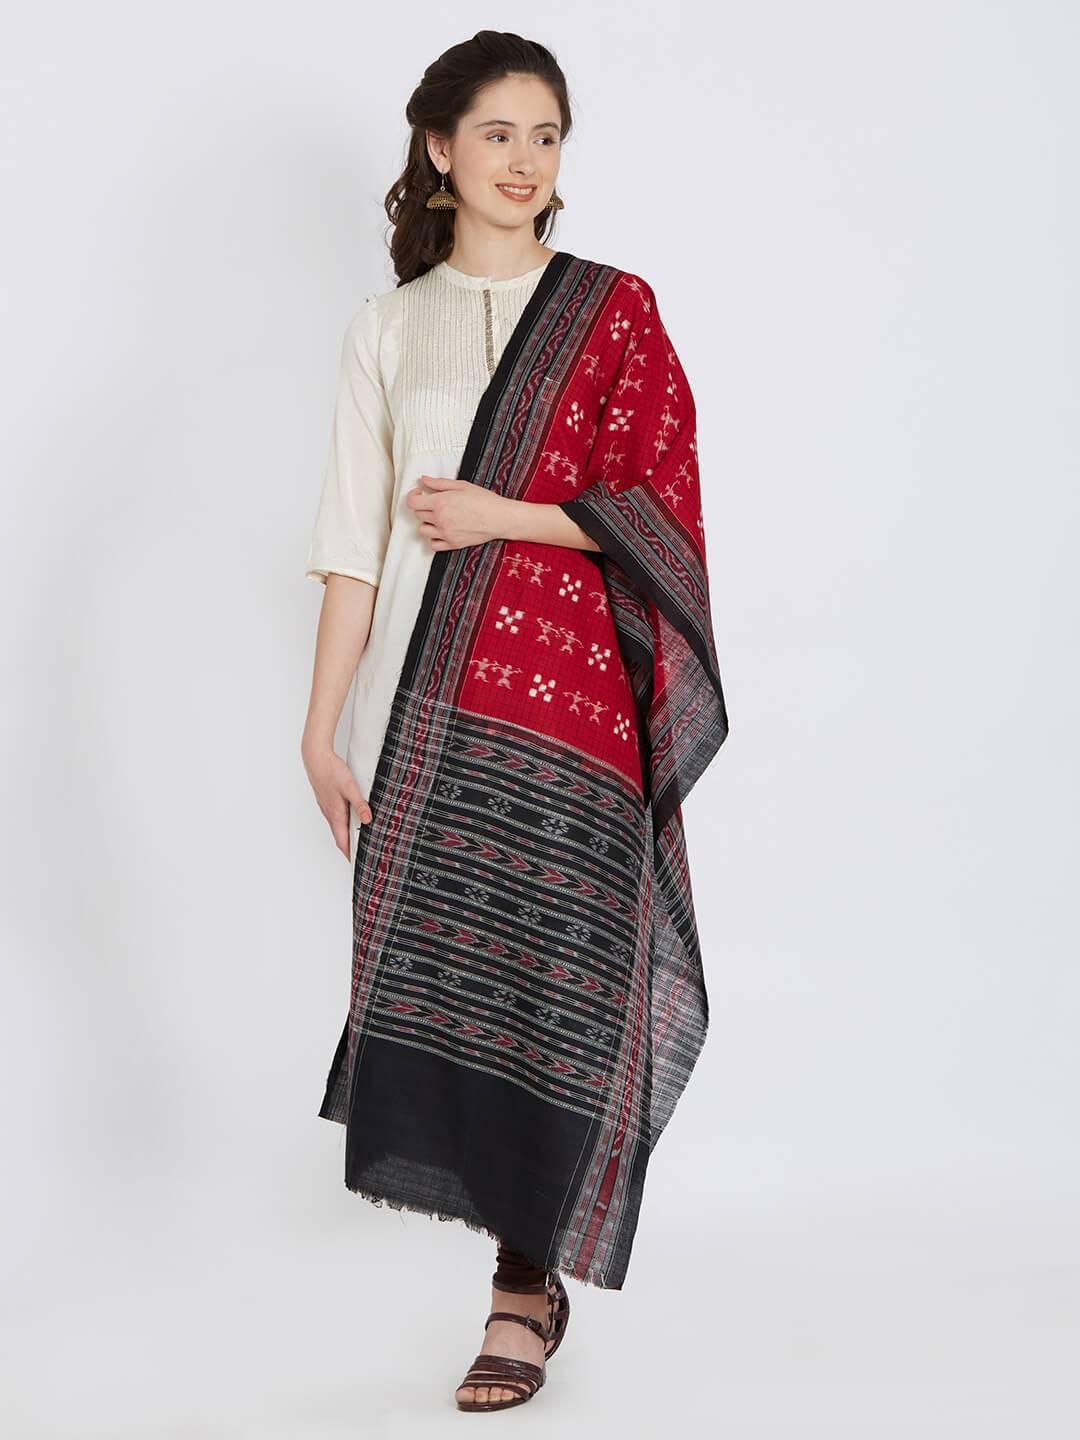 CraftsCollection.in - Red Sambalpuri Stole with Tribal Woven Motifs